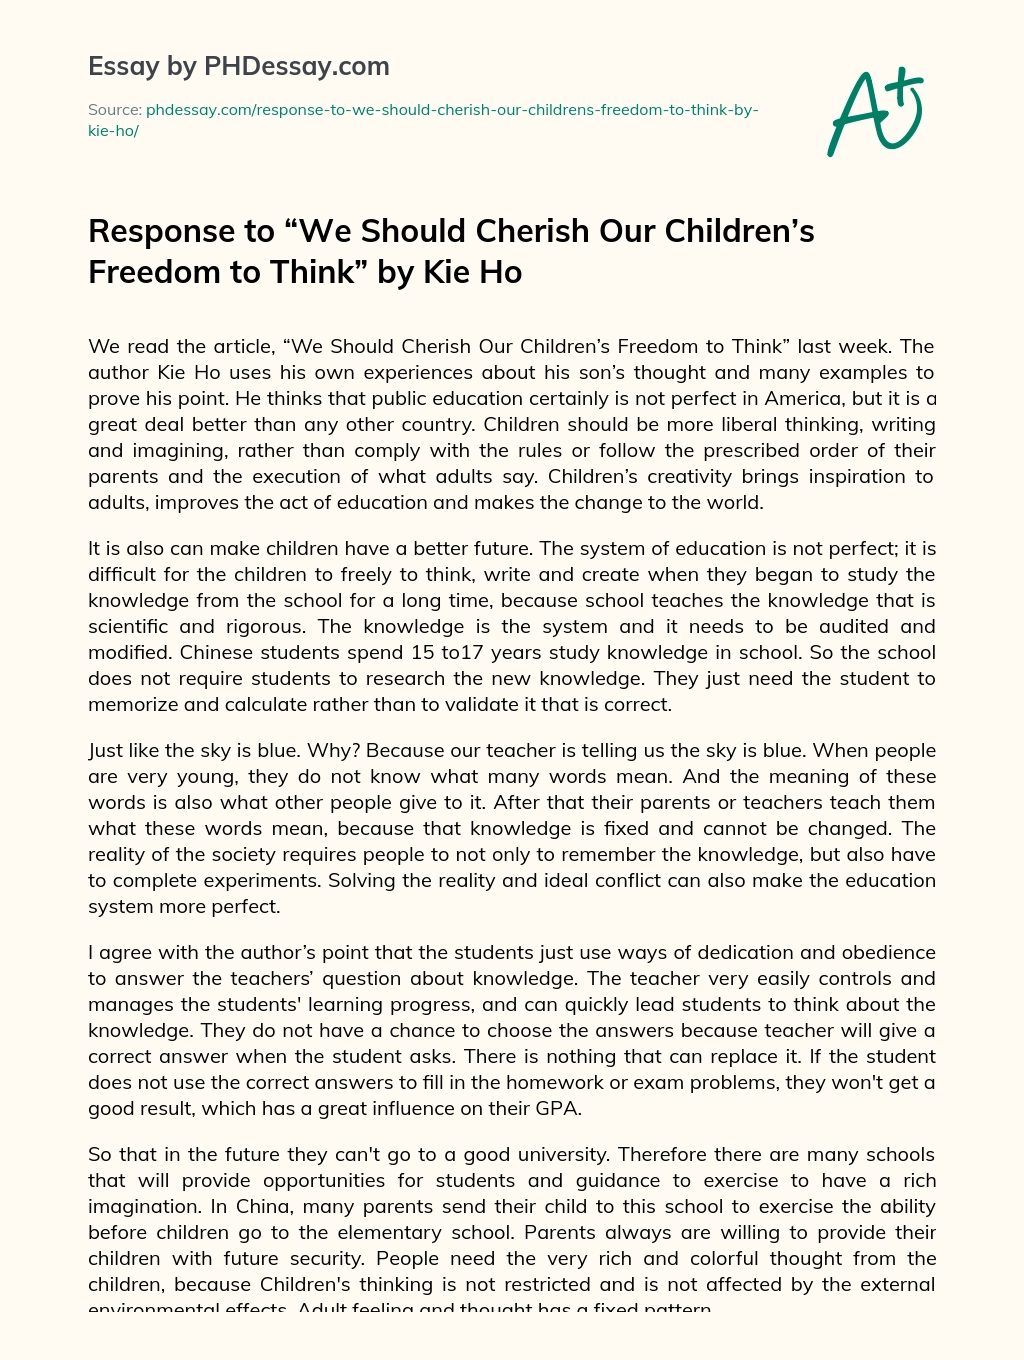 Response to “We Should Cherish Our Children’s Freedom to Think” by Kie Ho essay